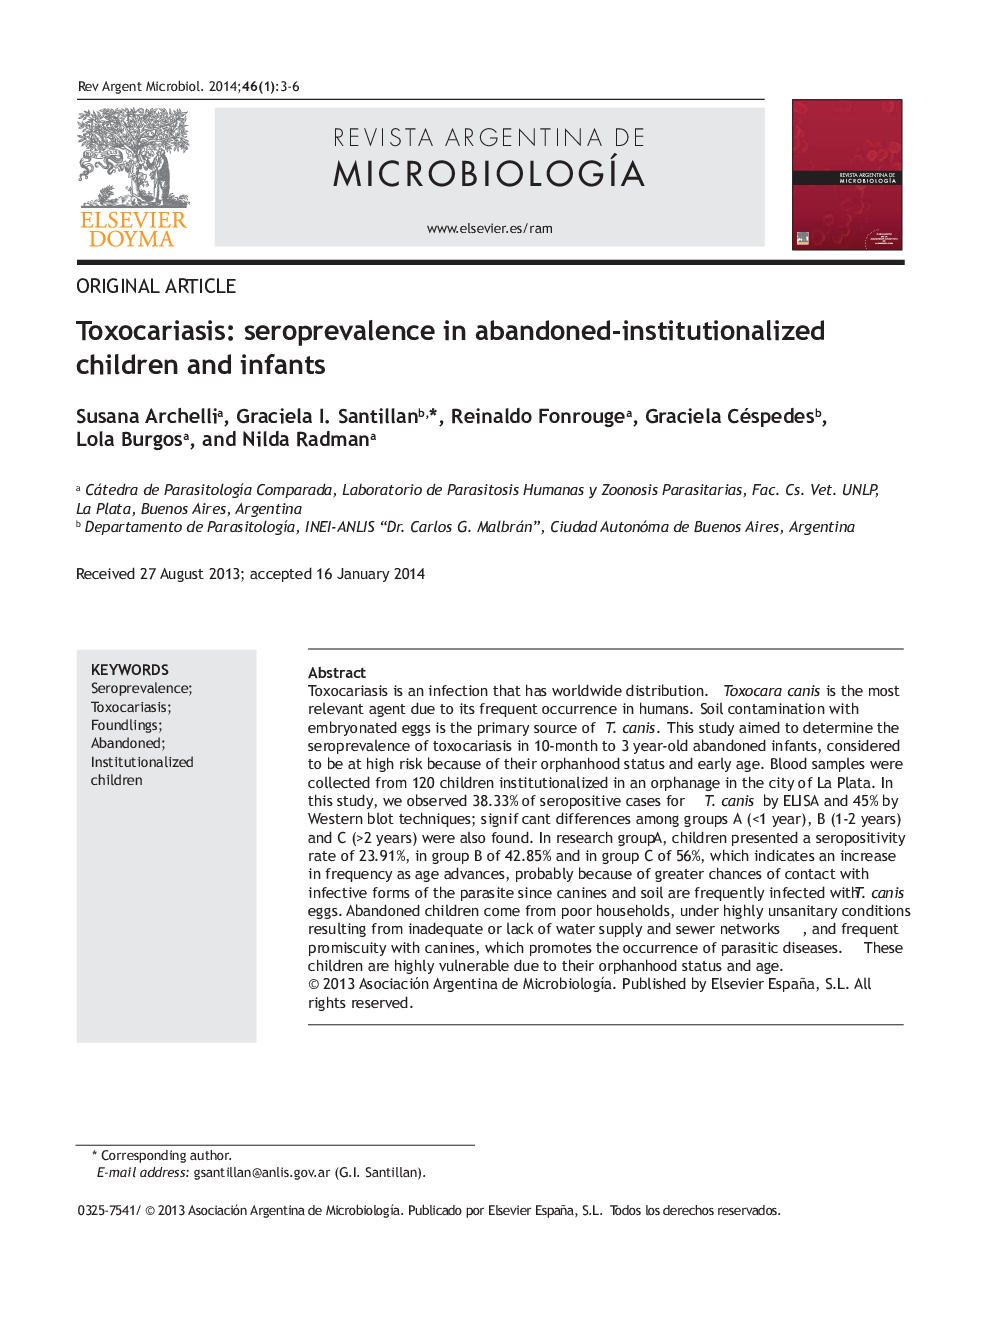 Toxocariasis: seroprevalence in abandoned-institutionalized children and infants